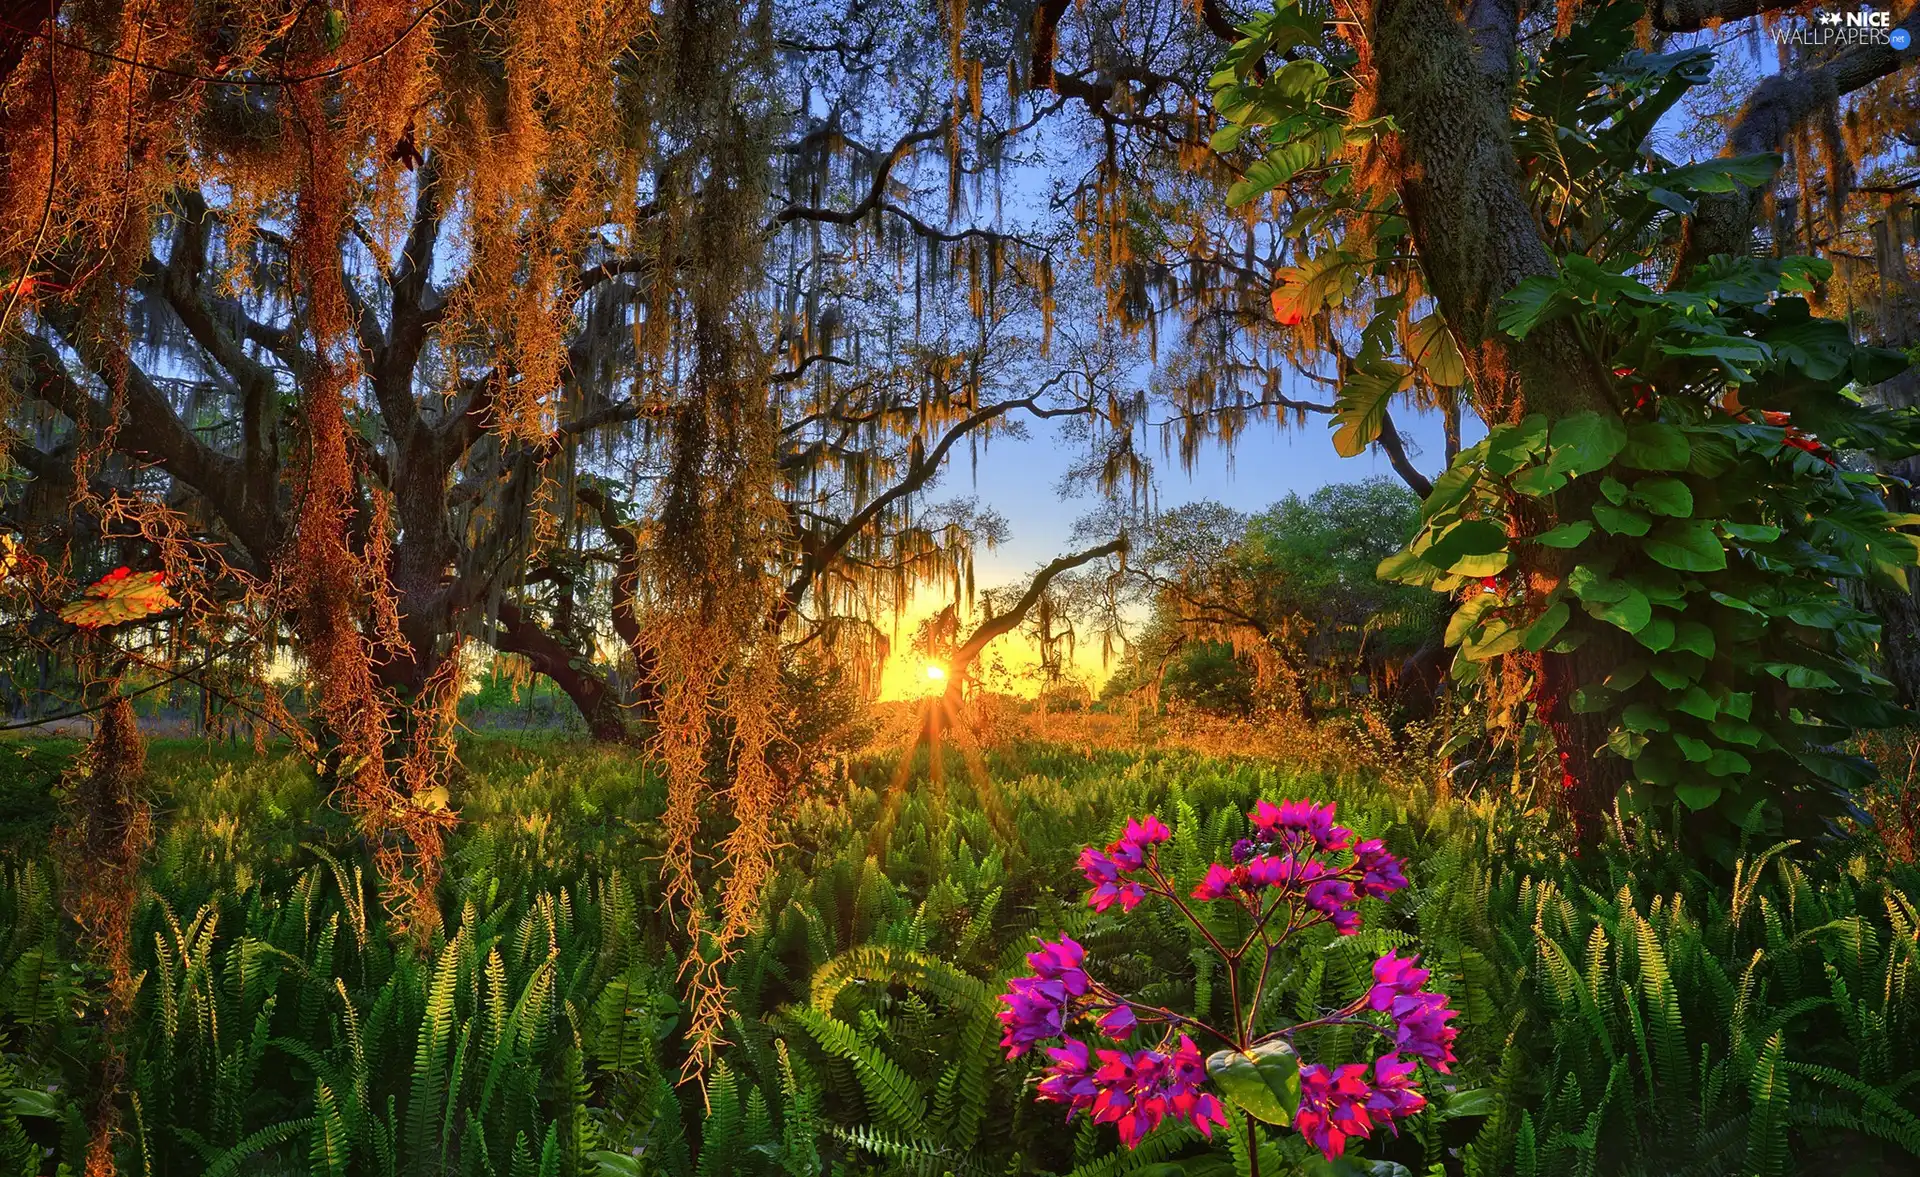 Lake Wales, Camping Coleman Landings Campground, Flowers, Sunrise, viewes, State of Florida, The United States, trees